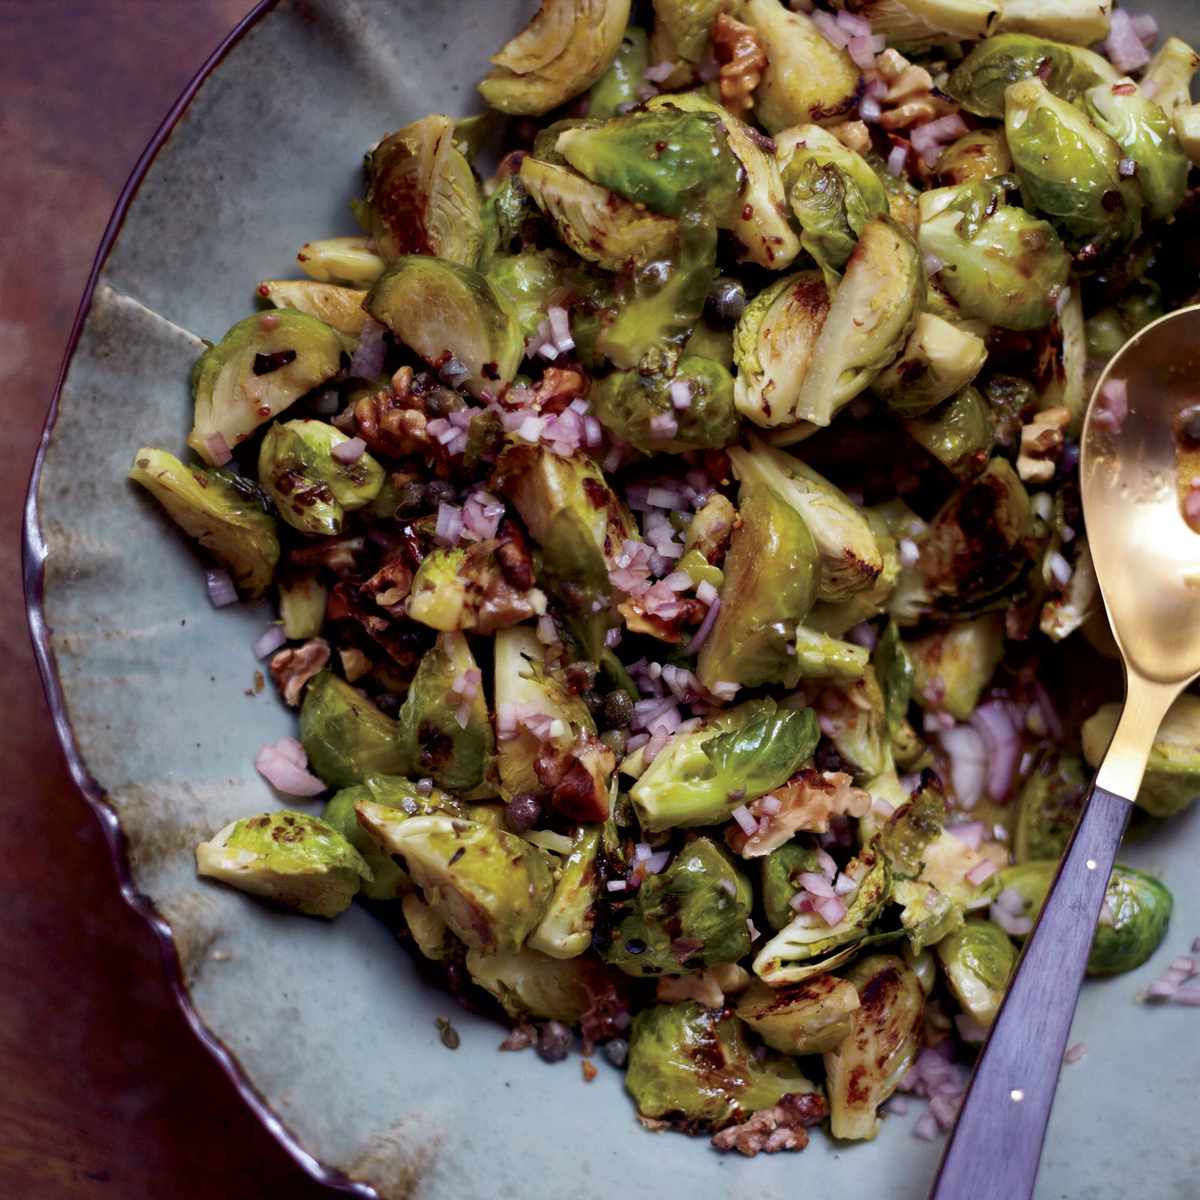 Roasted Brussels Sprouts with Capers, Walnuts and Anchovies Recipe